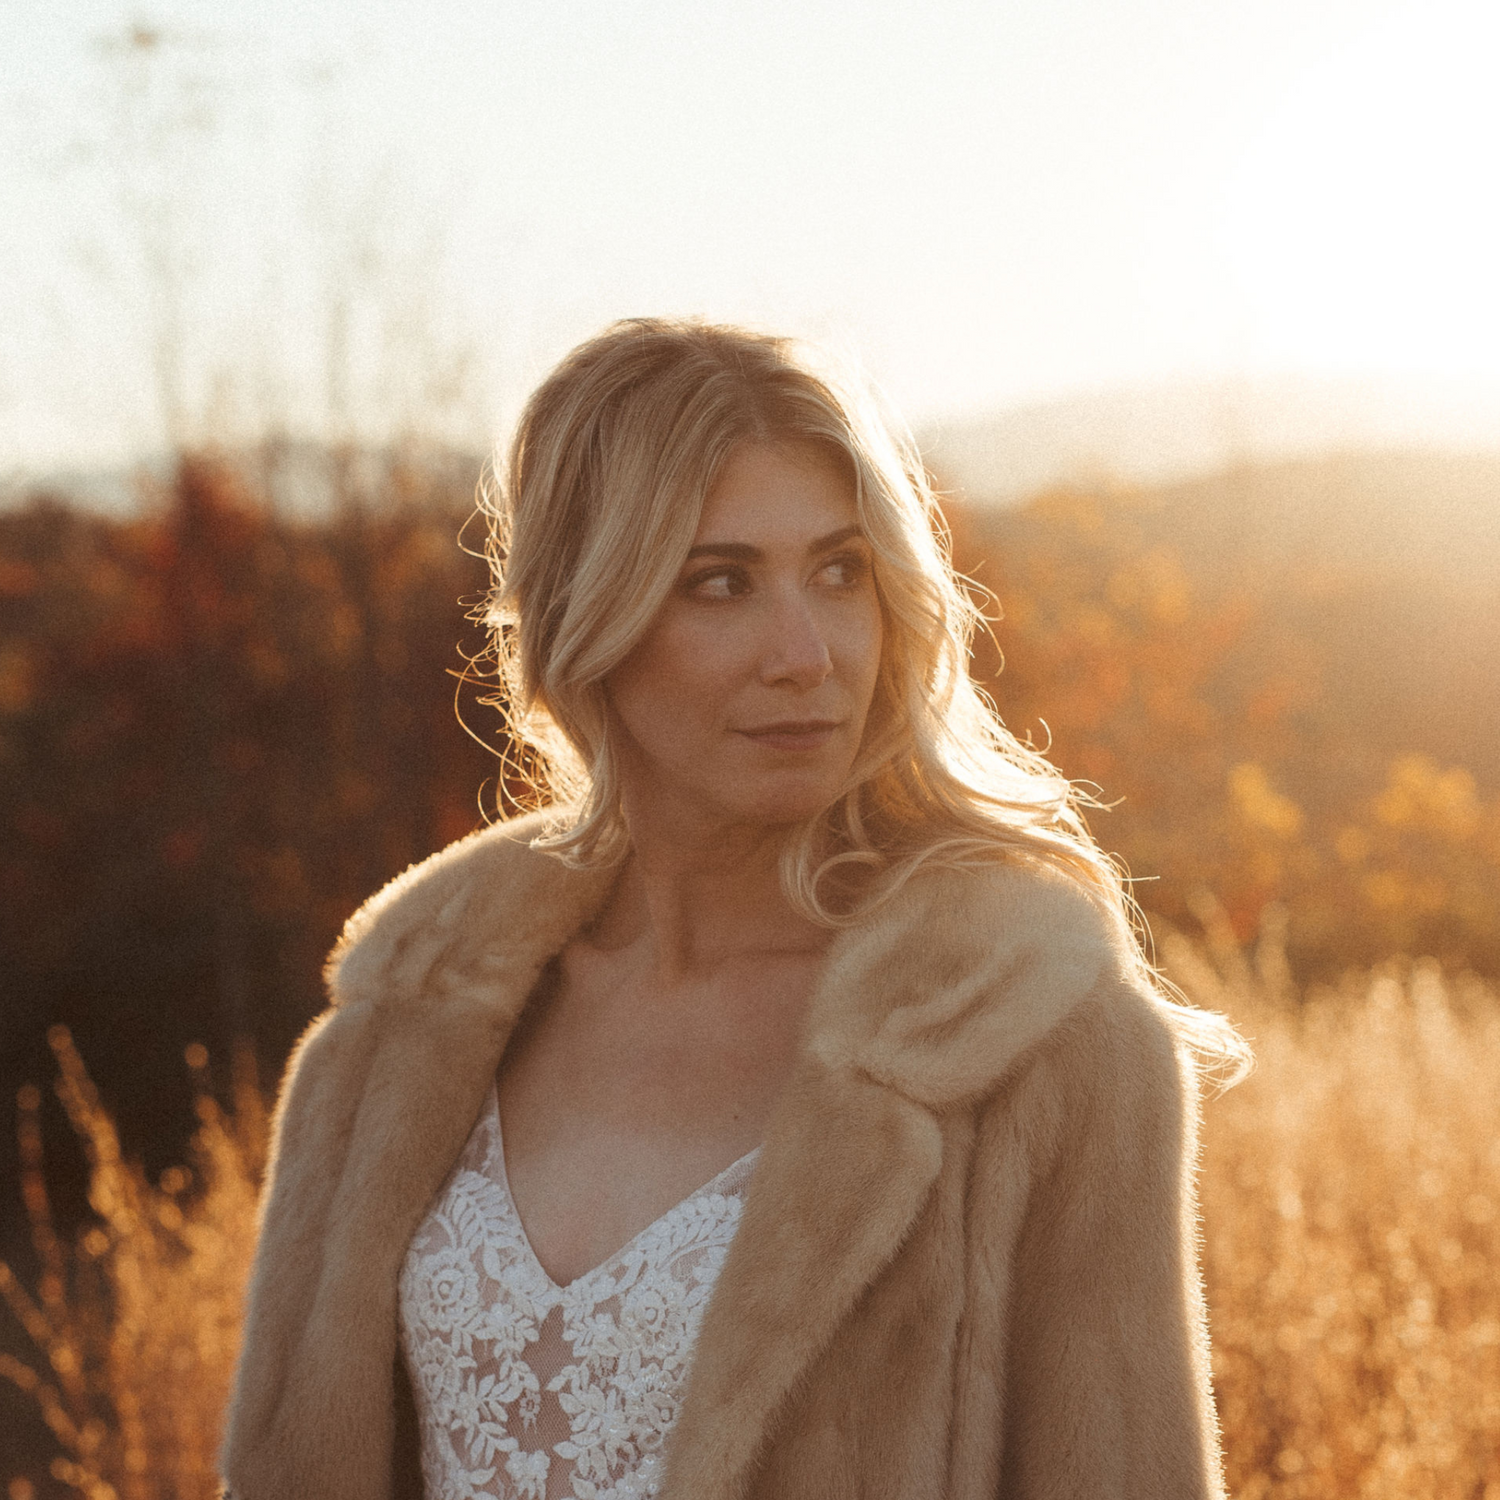  a woman in a lace top and fur coat, standing in a field during sunset. Her gaze is directed away from the camera, and the warm backlight from the sun enhances the autumnal tones of the surrounding landscape.